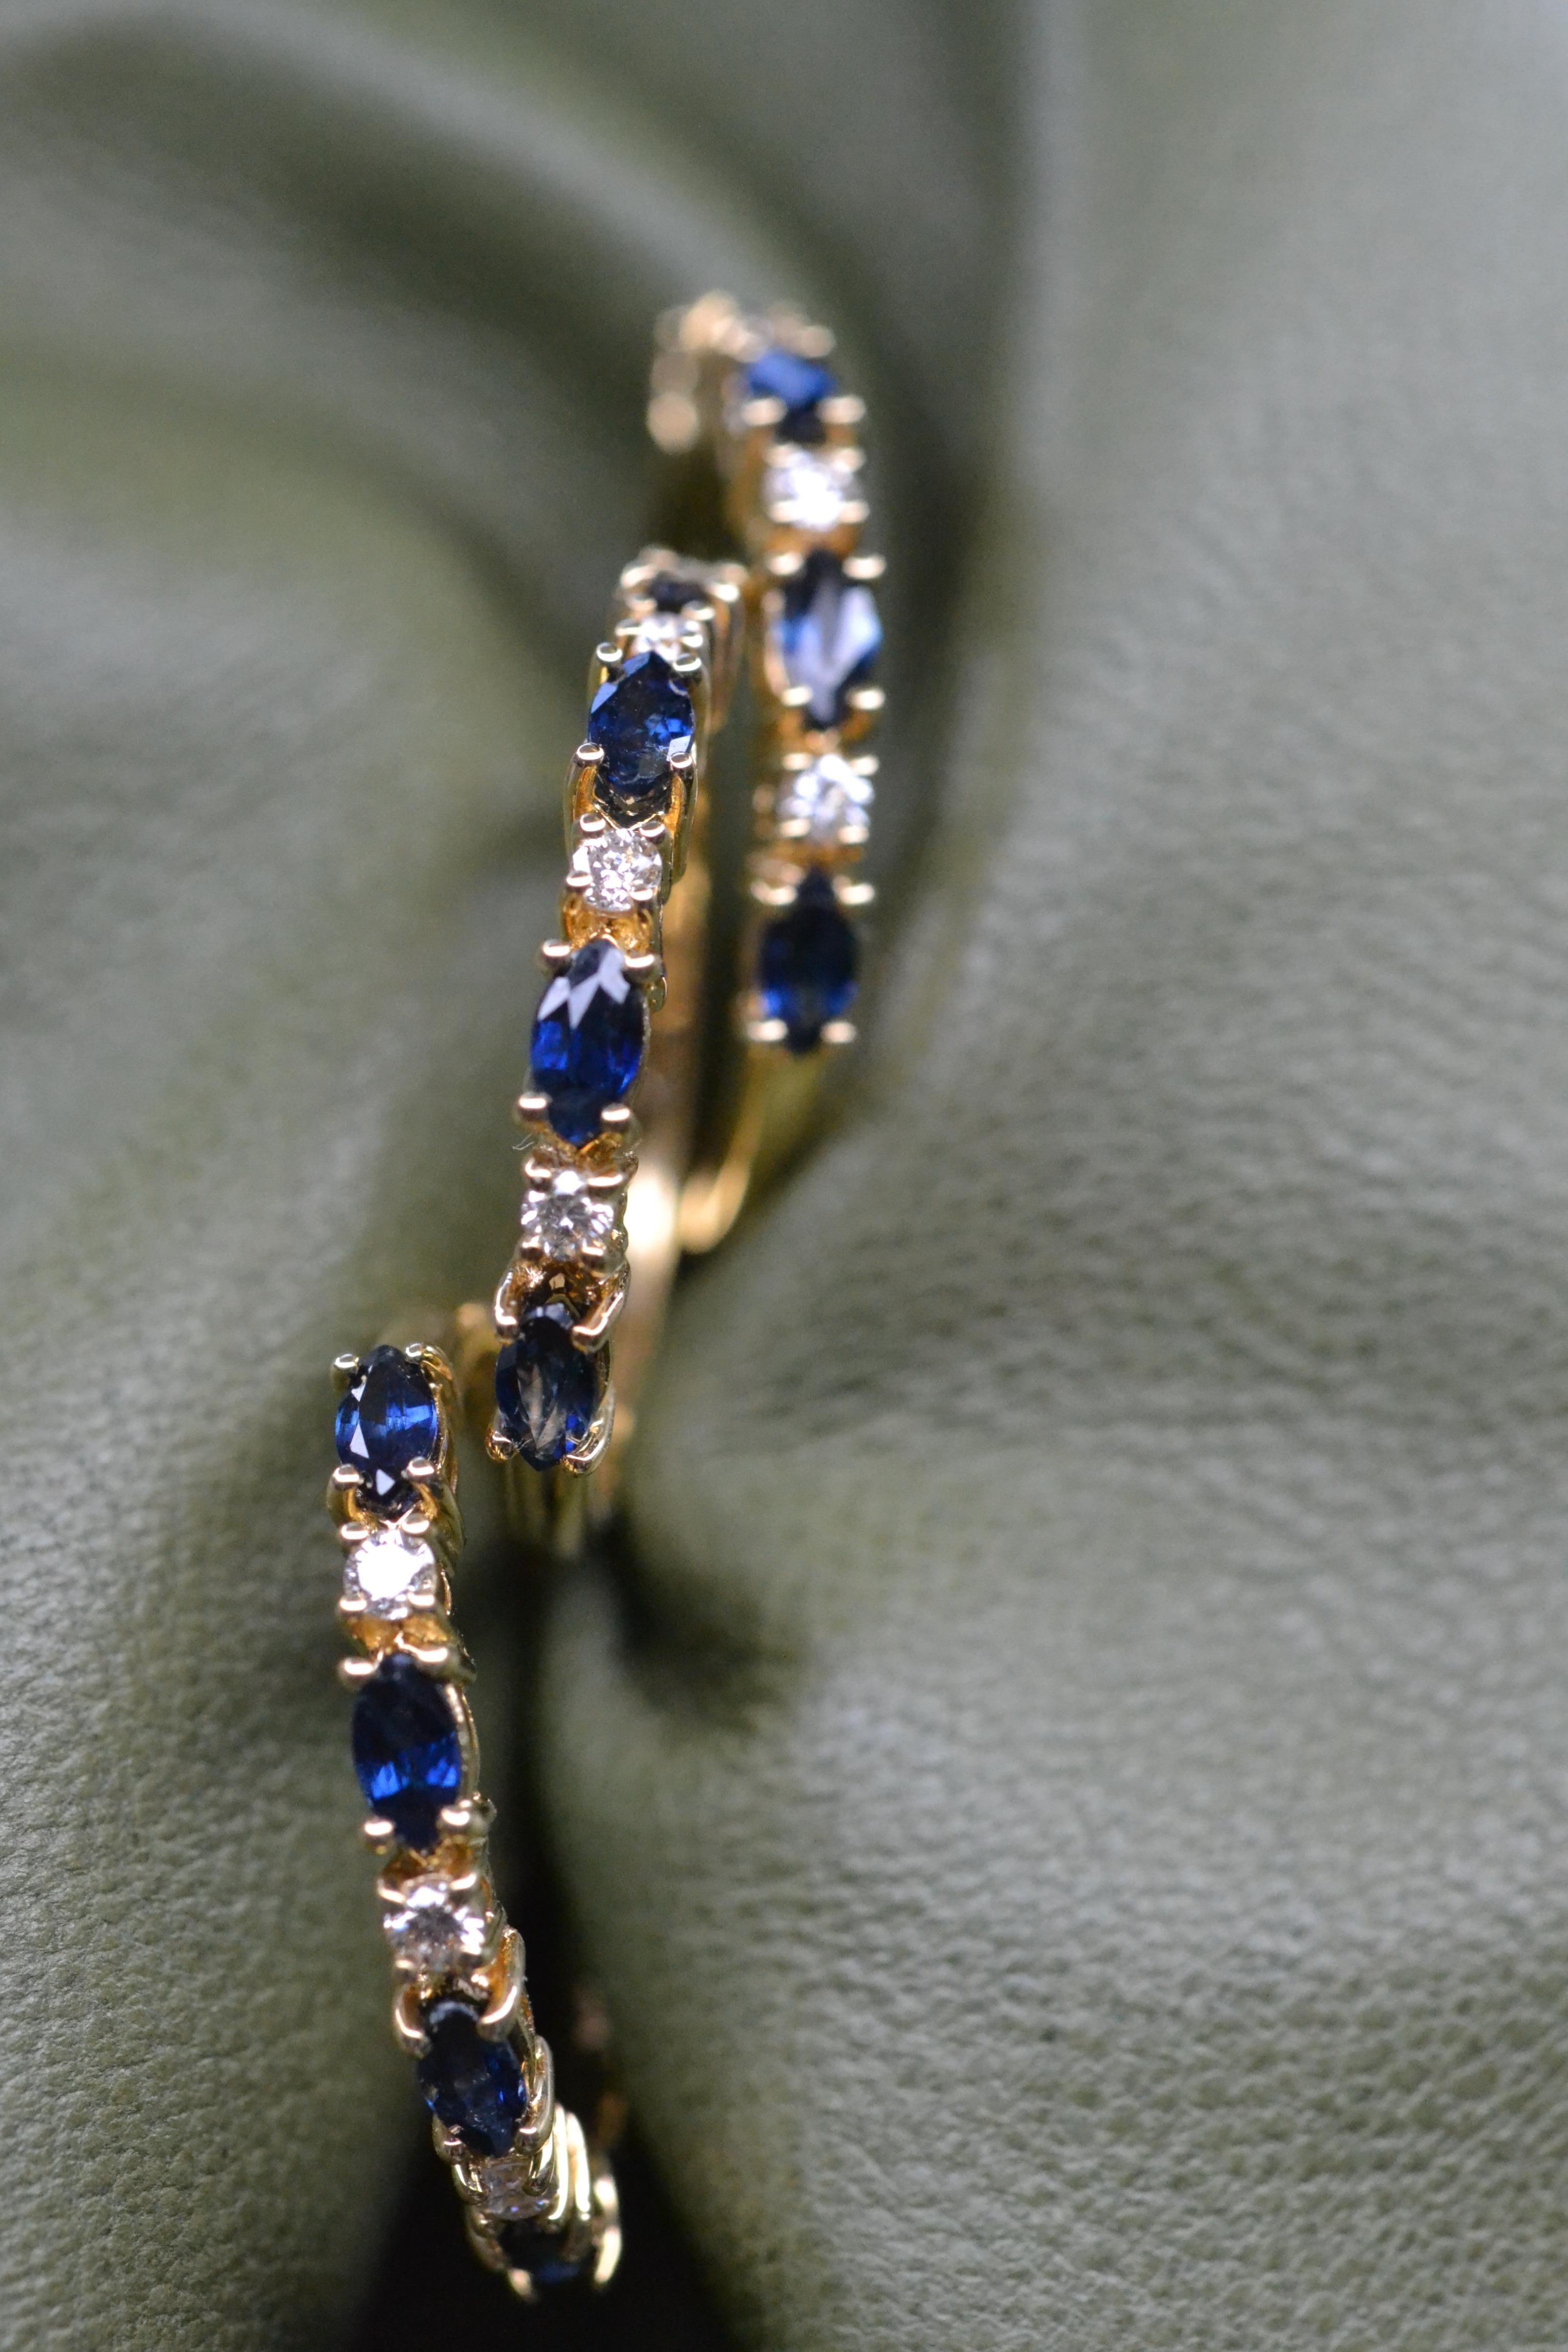 Vintage 18k Gold Sapphire and Diamond Marquise Ring

This 4-stone marquise ring from the 80s is the perfect delicate piece to compliment any outfit. You can wear it alone for an everyday aesthetic or stack several rings together for a special